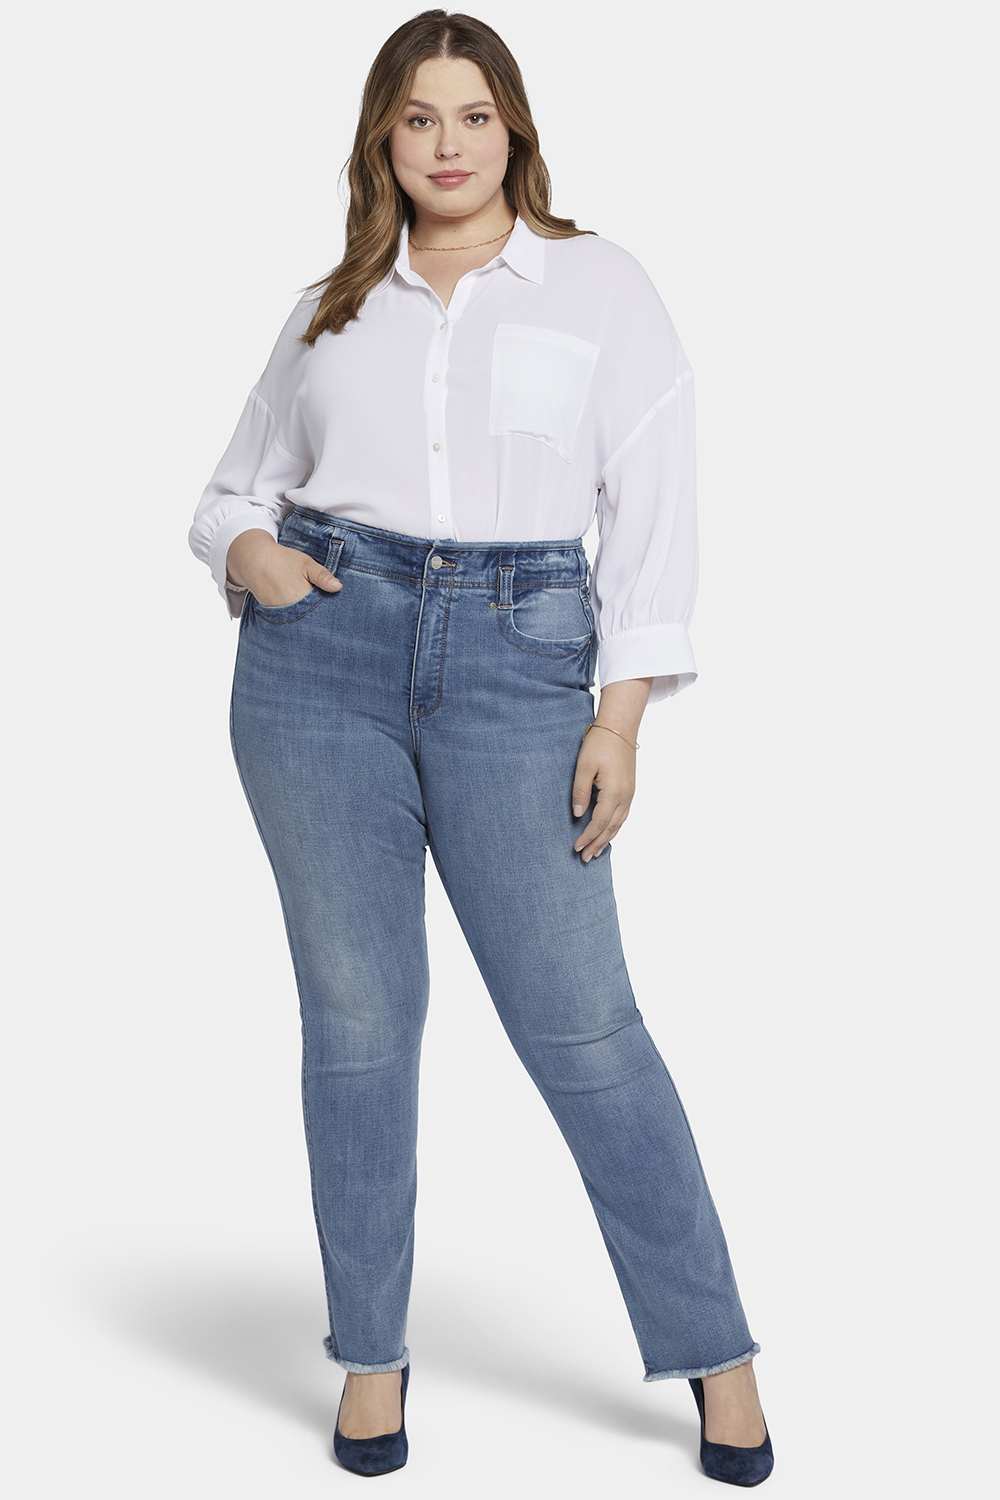 Vintage High Waisted Wide Leg Cropped Flare Jeans For Women With Knee Holes  And Ripped Detail Plus Size From Mling3, $30.23